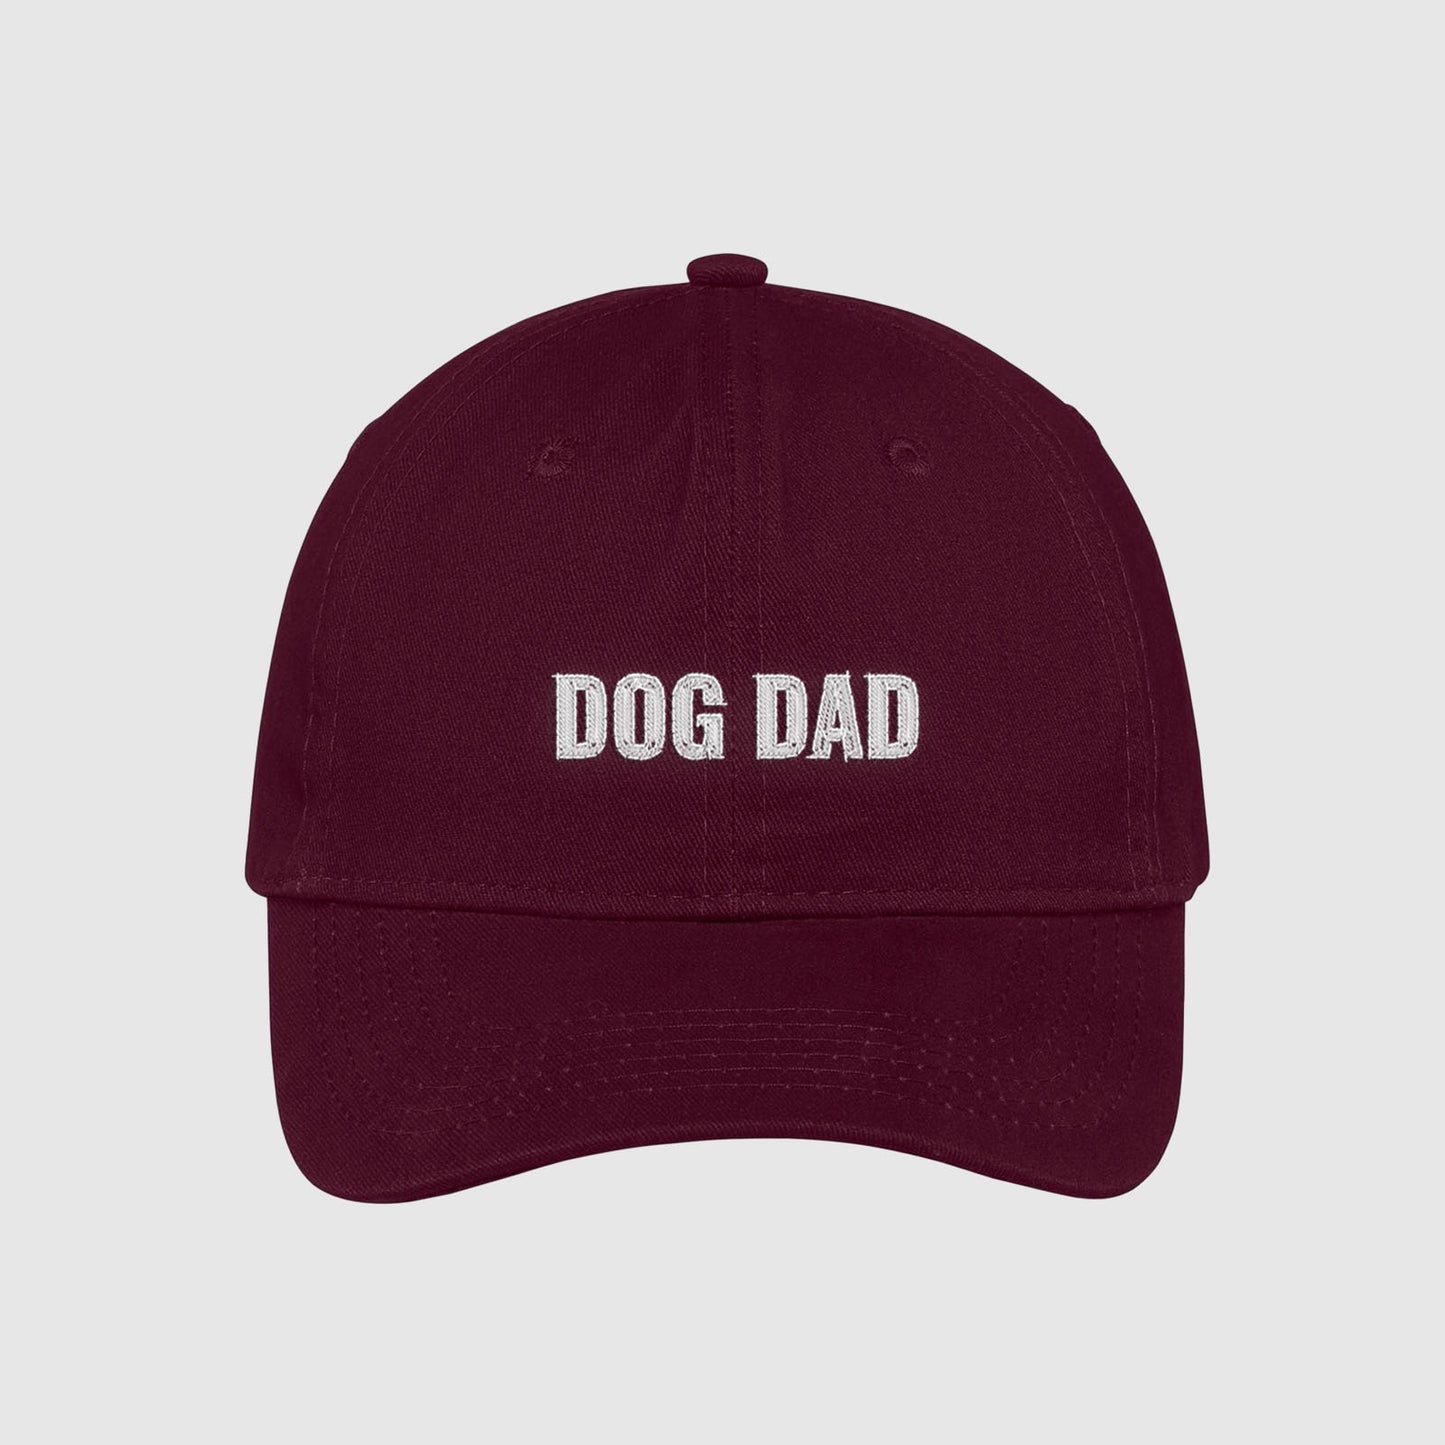 Maroon Dog Dad Hat embroidered with white text